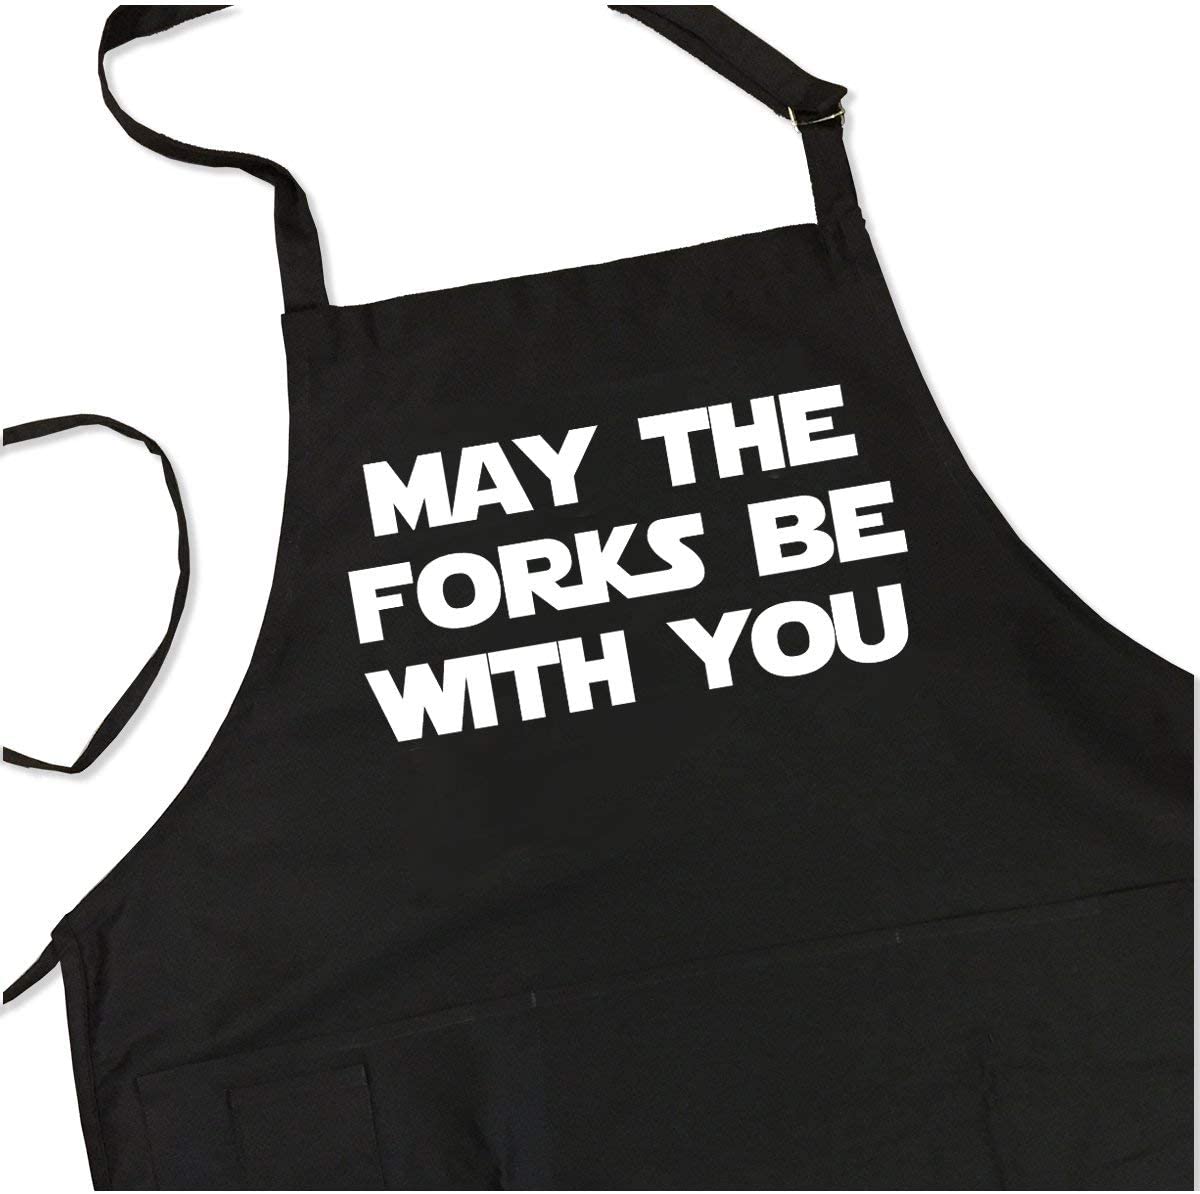 Funny Apron - May the Forks Be With You - Themed Apron For Dad - 1 Size Fits All Chef Apron Poly/Cotton 4 Utility Pockets, Adjustable Neck and Extra Long Waist Ties